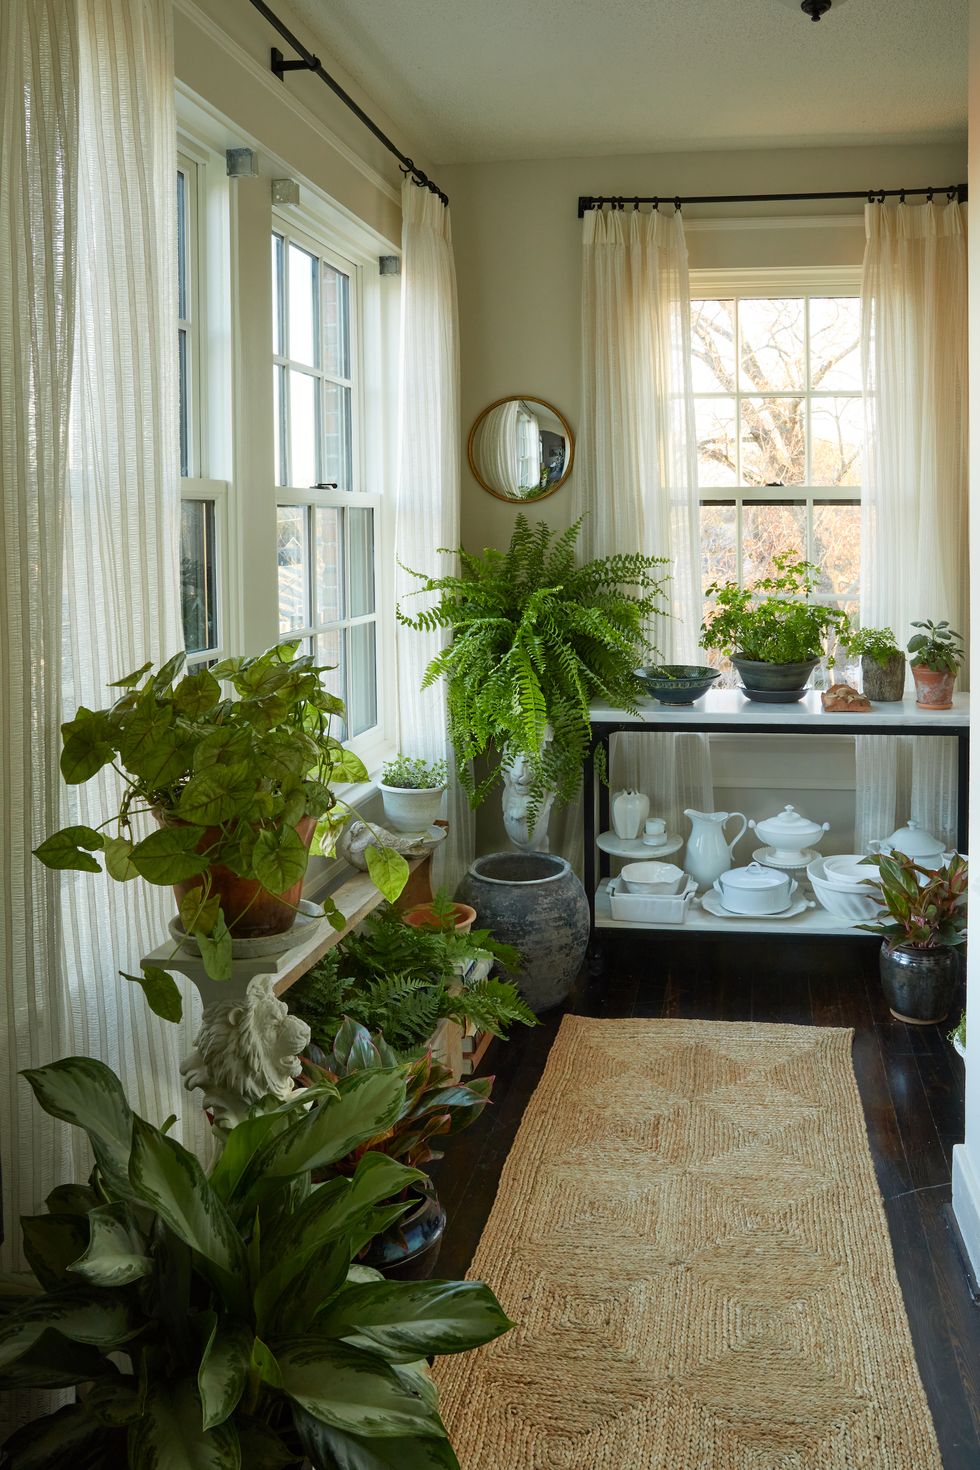 Small room used for conservatory and house plants - Veranda. #conservatories